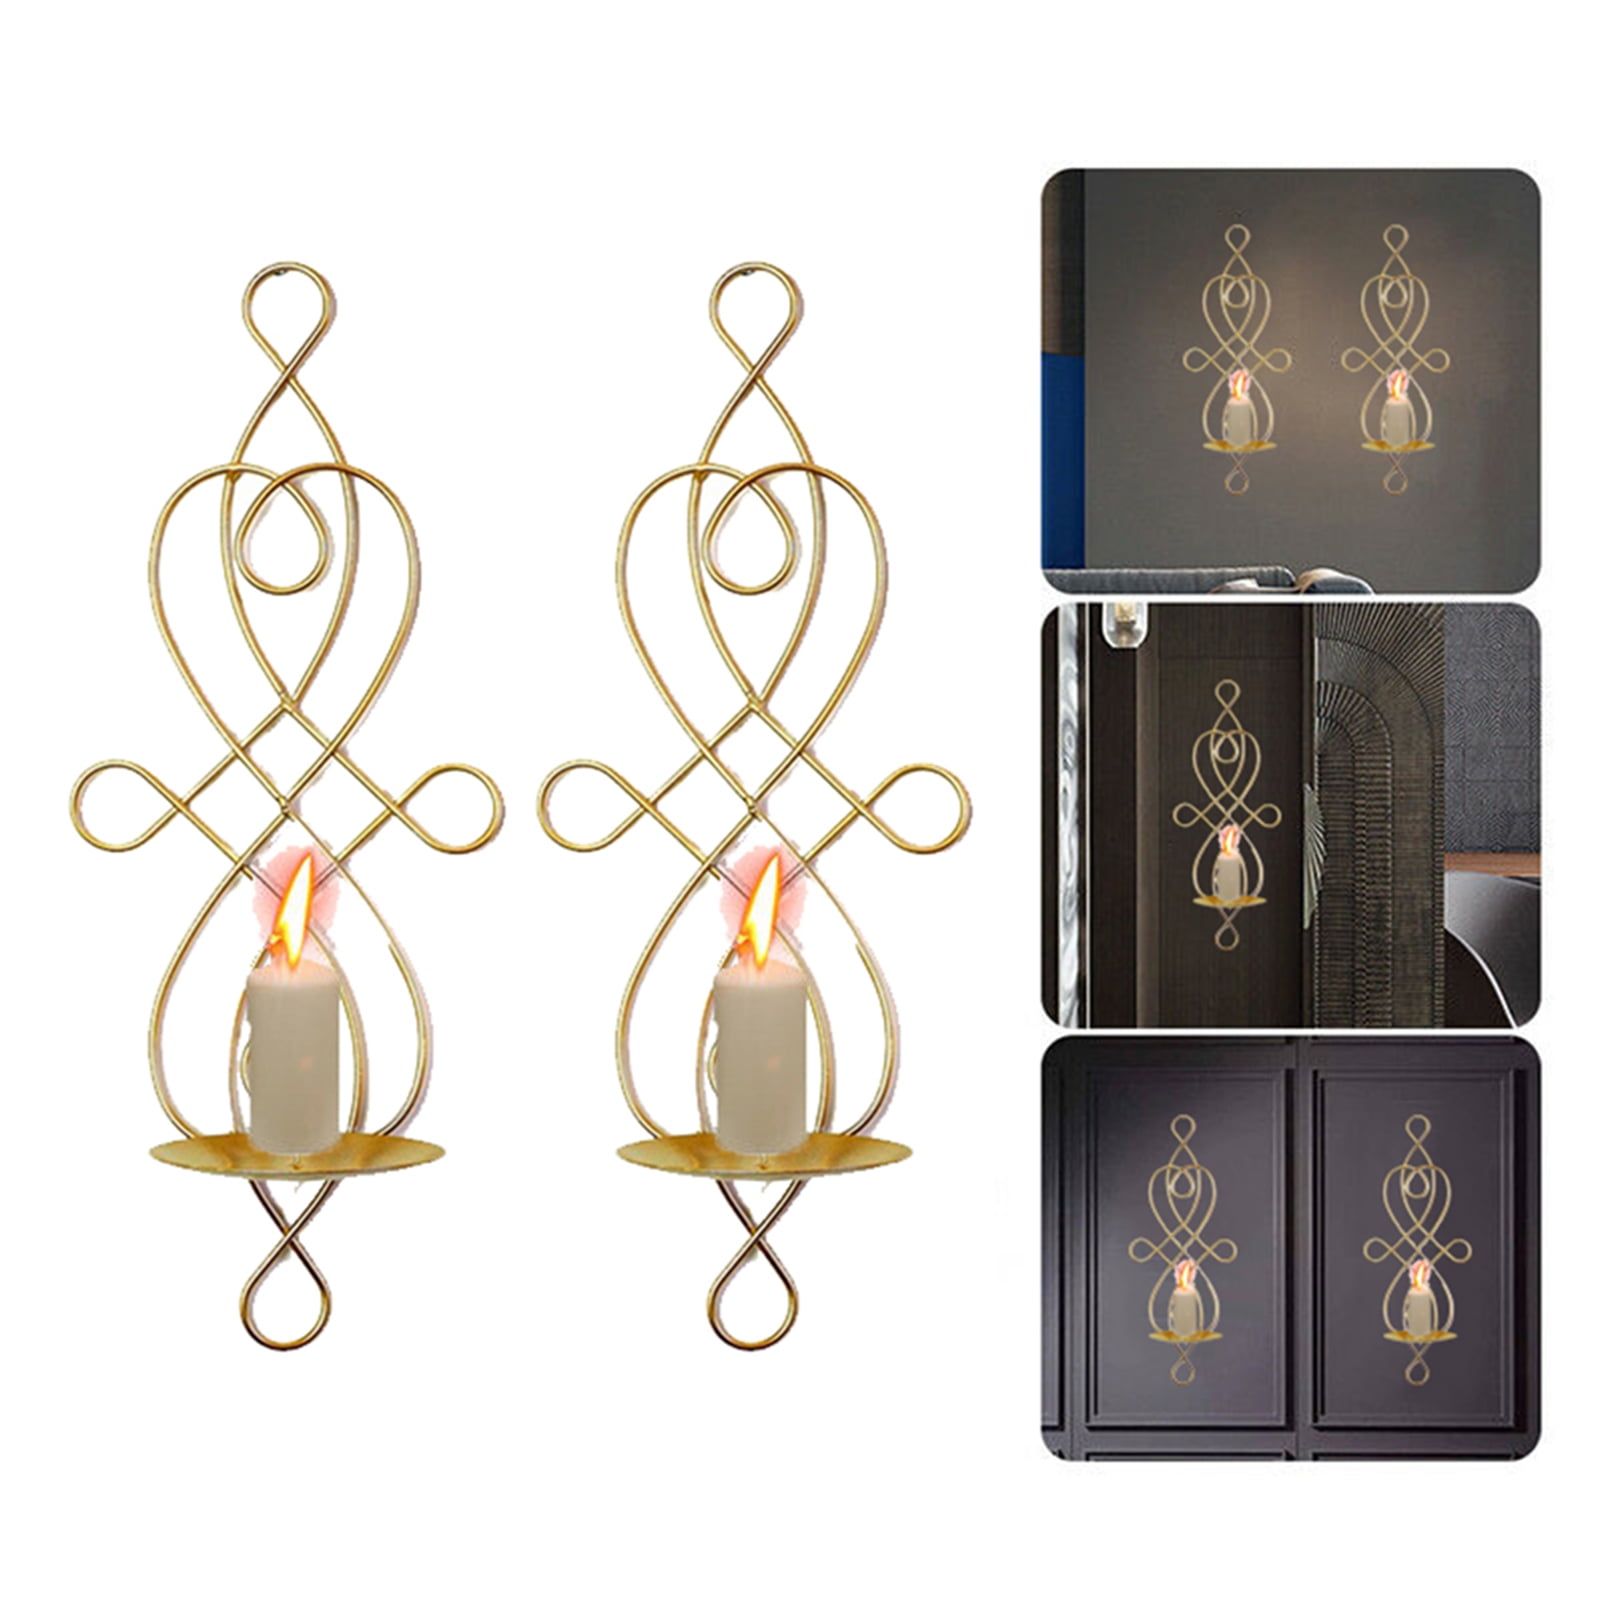 Wall Candle Sconces Elegant Swirling Iron geometric Hanging Wall Mounted Decorative Tea Light Candle Holder for Home Decorations,Weddings,Events 